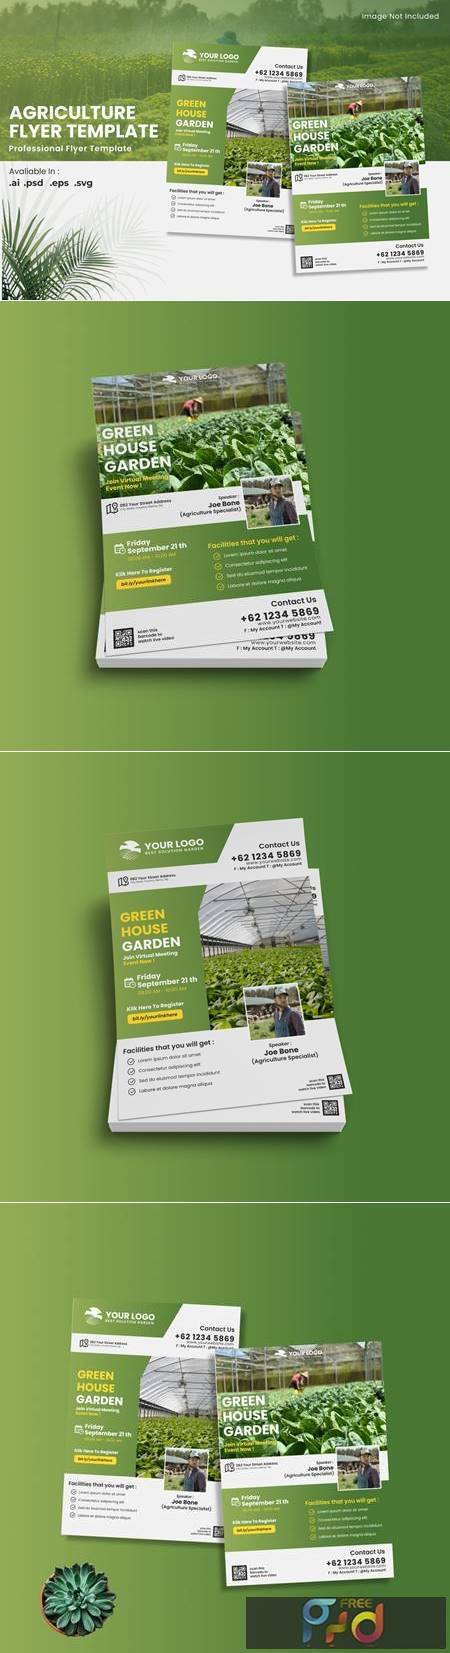 Agriculture Promotion Flyer Template Q6HVDP9 1